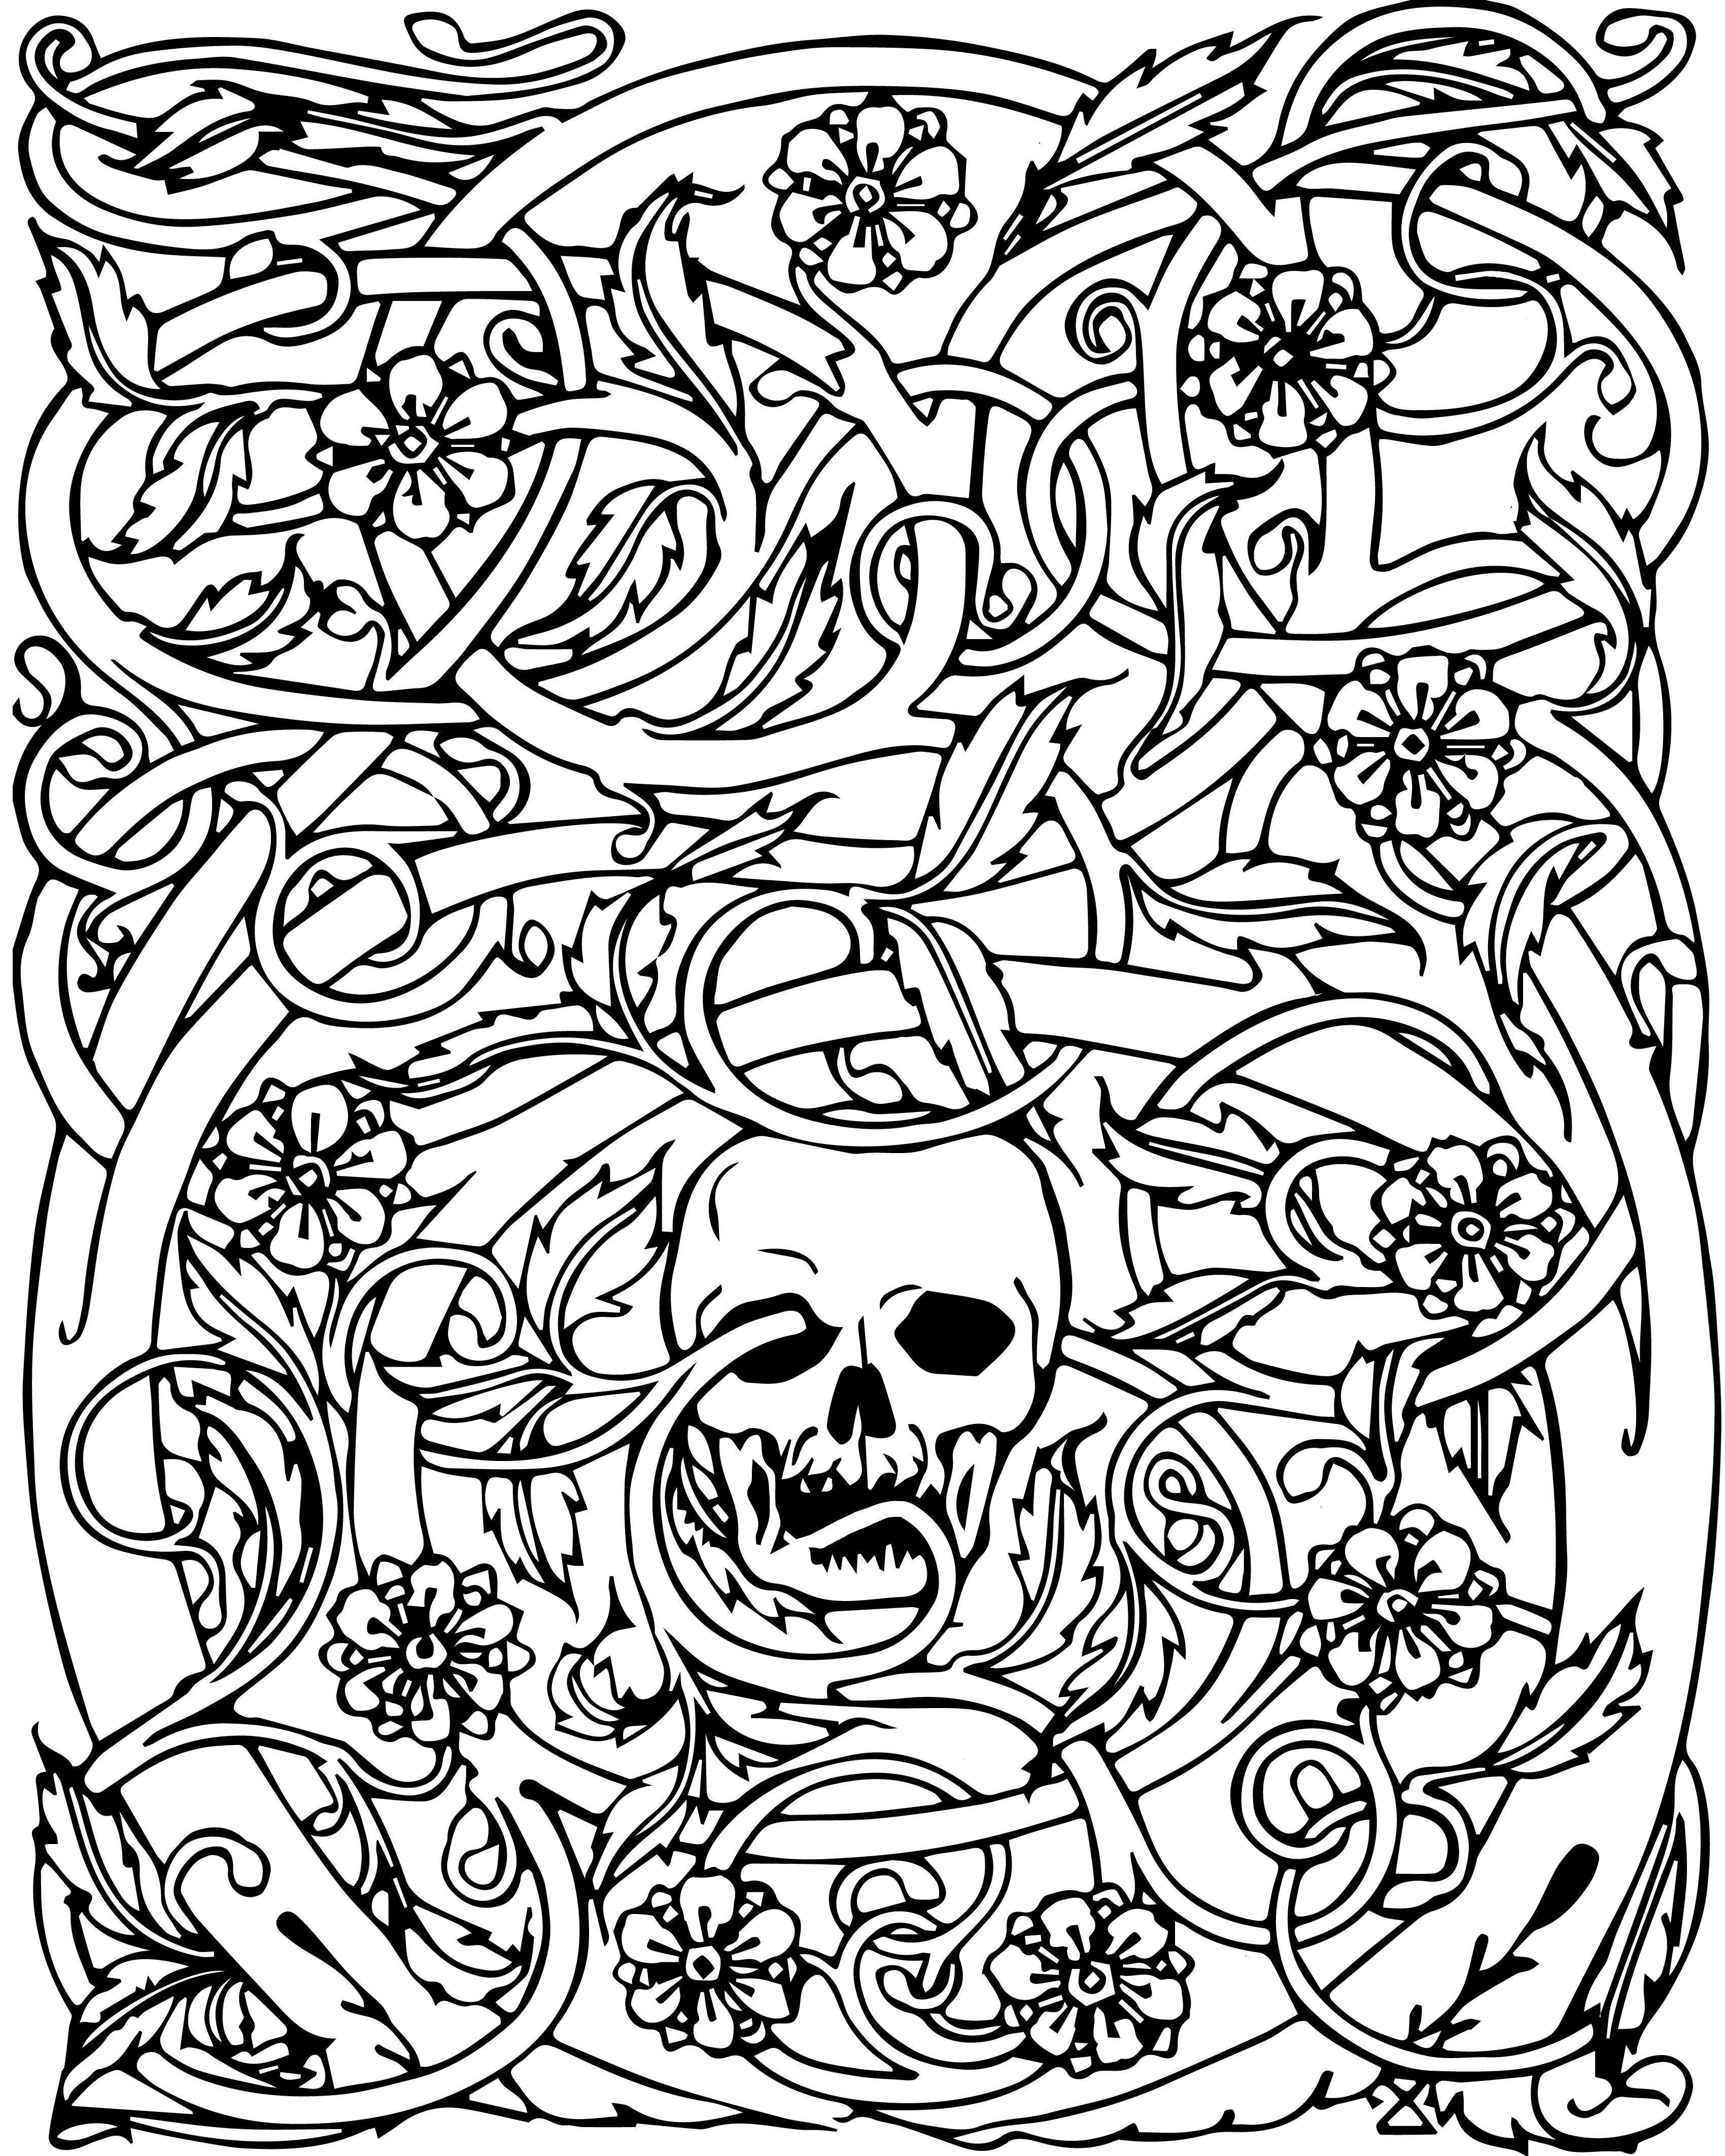 coloring pages for adults free large images. 1000 images about ...